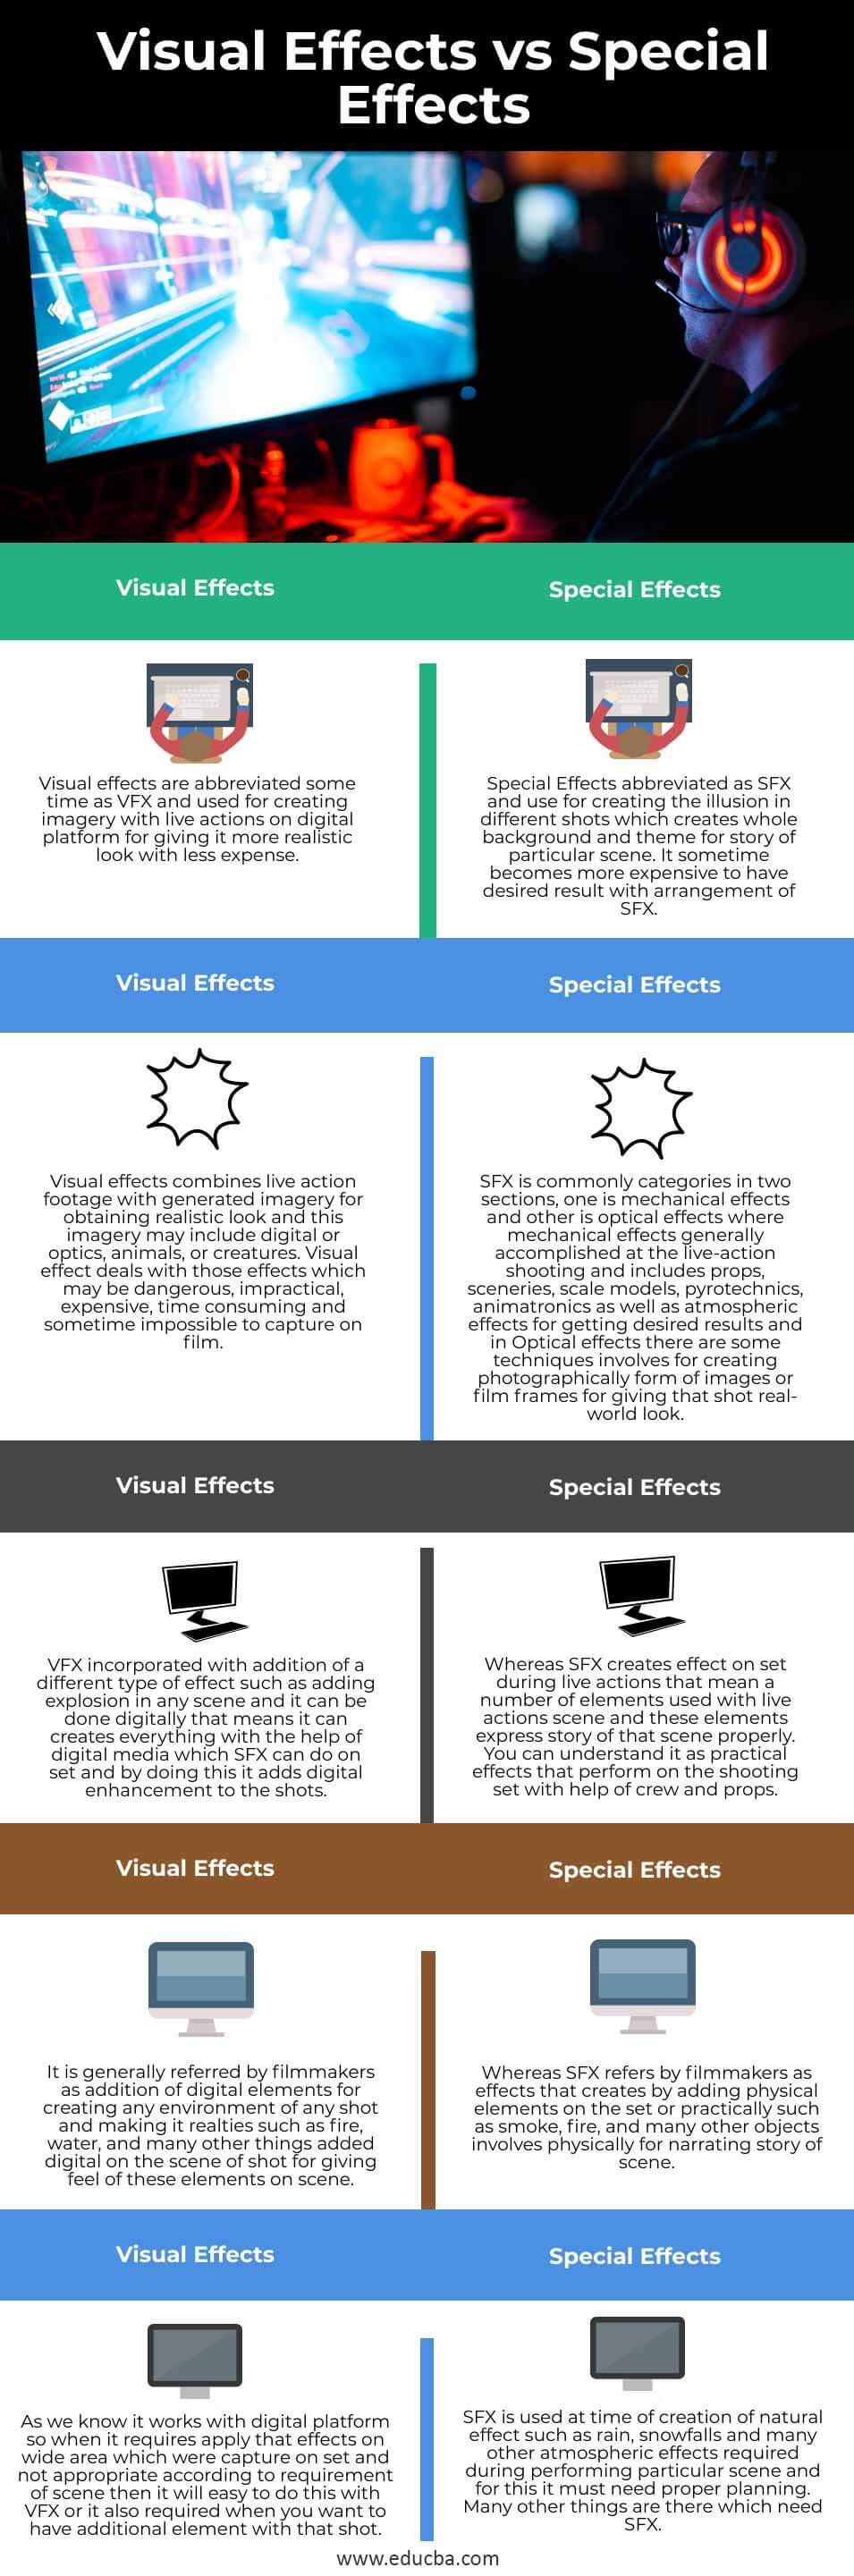 Visual-Effects-vs-Special-Effects-info